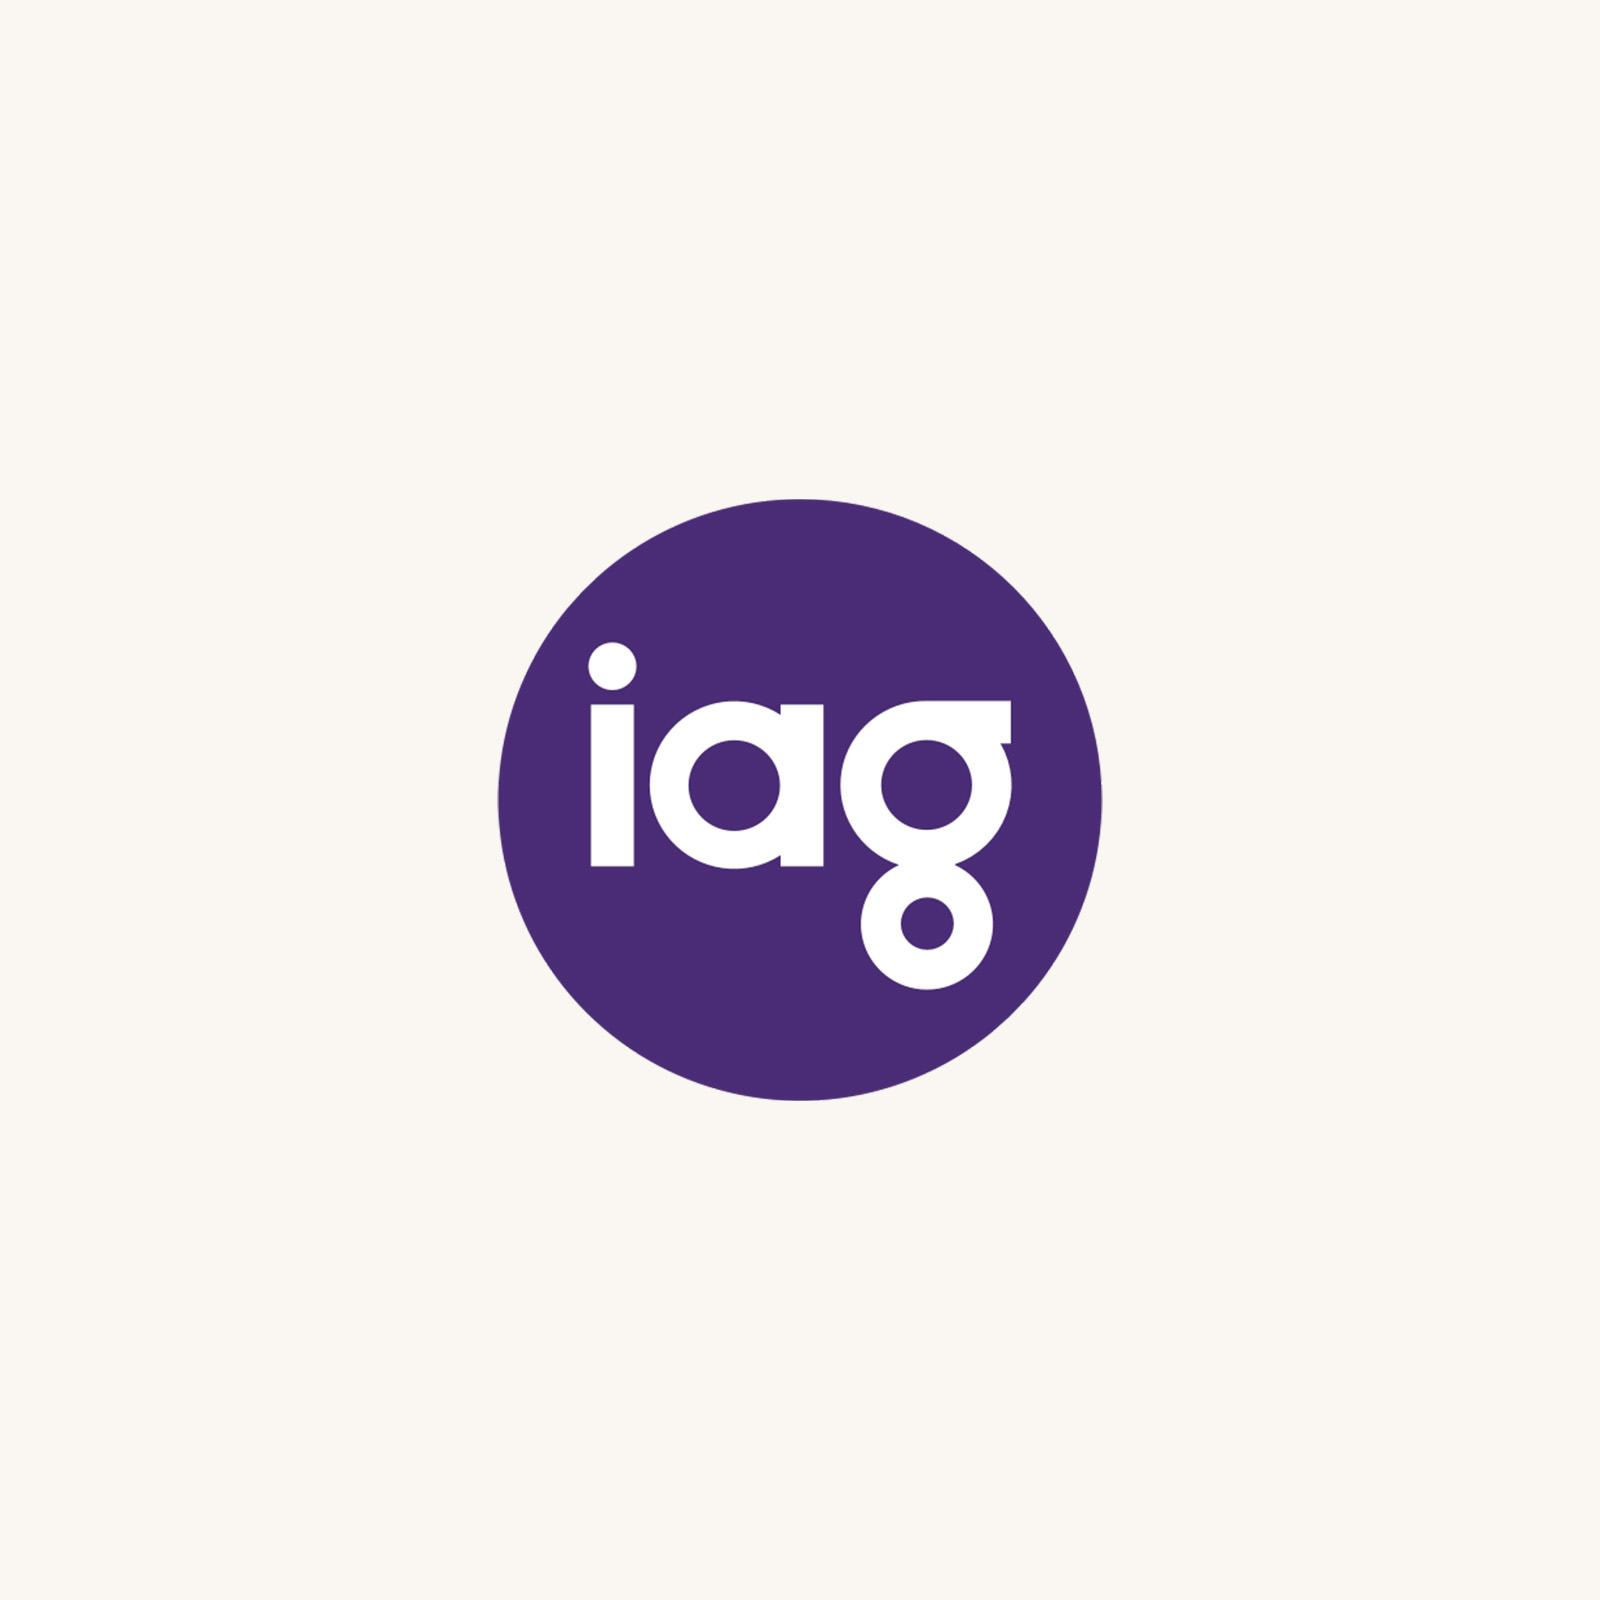 Peter Ballis and Nathan Masters recently appointed as Principals, Strategy at IAG.